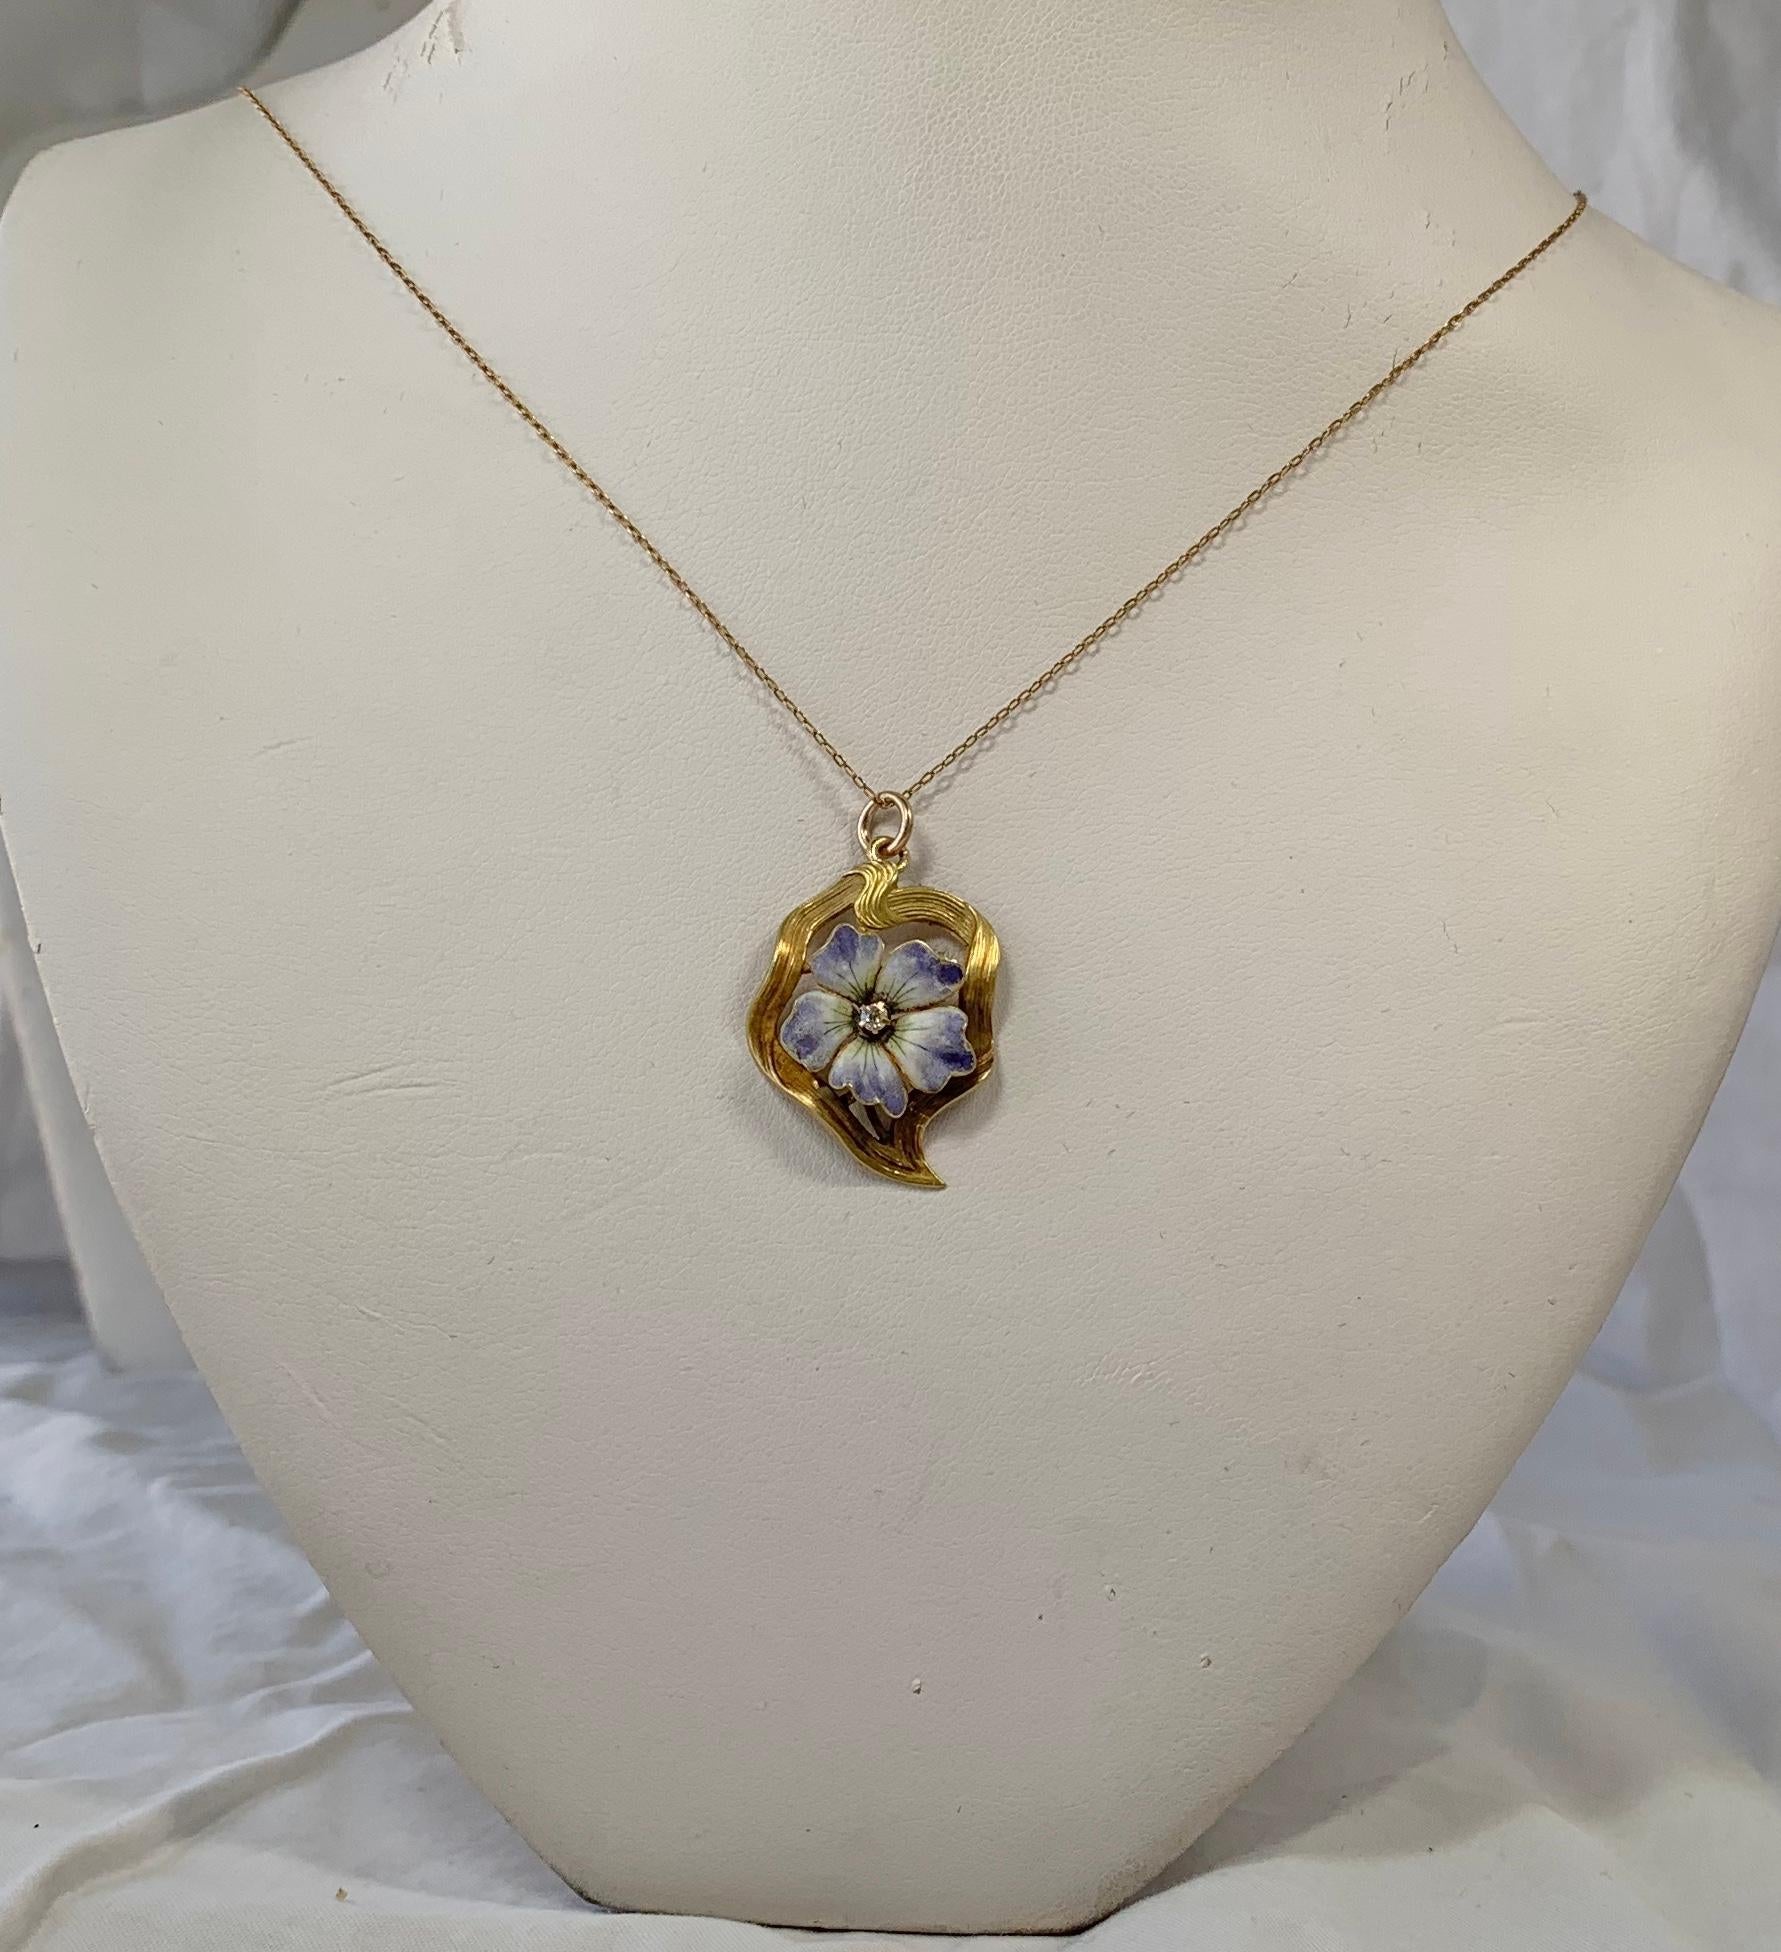 THIS IS A GORGEOUS VICTORIAN - ART NOUVEAU PENDANT NECKLACE WITH A BEAUTIFUL LAVENDER, CREAM AND BLUE ENAMEL FORGET-ME-NOT, OR PANSY FLOWER WITH AN OLD MINE CUT DIAMOND IN THE CENTER.  THE FLOWER IS SET IN AN ELEGANT GOLD RIBBON SURROUND WITH LOVELY